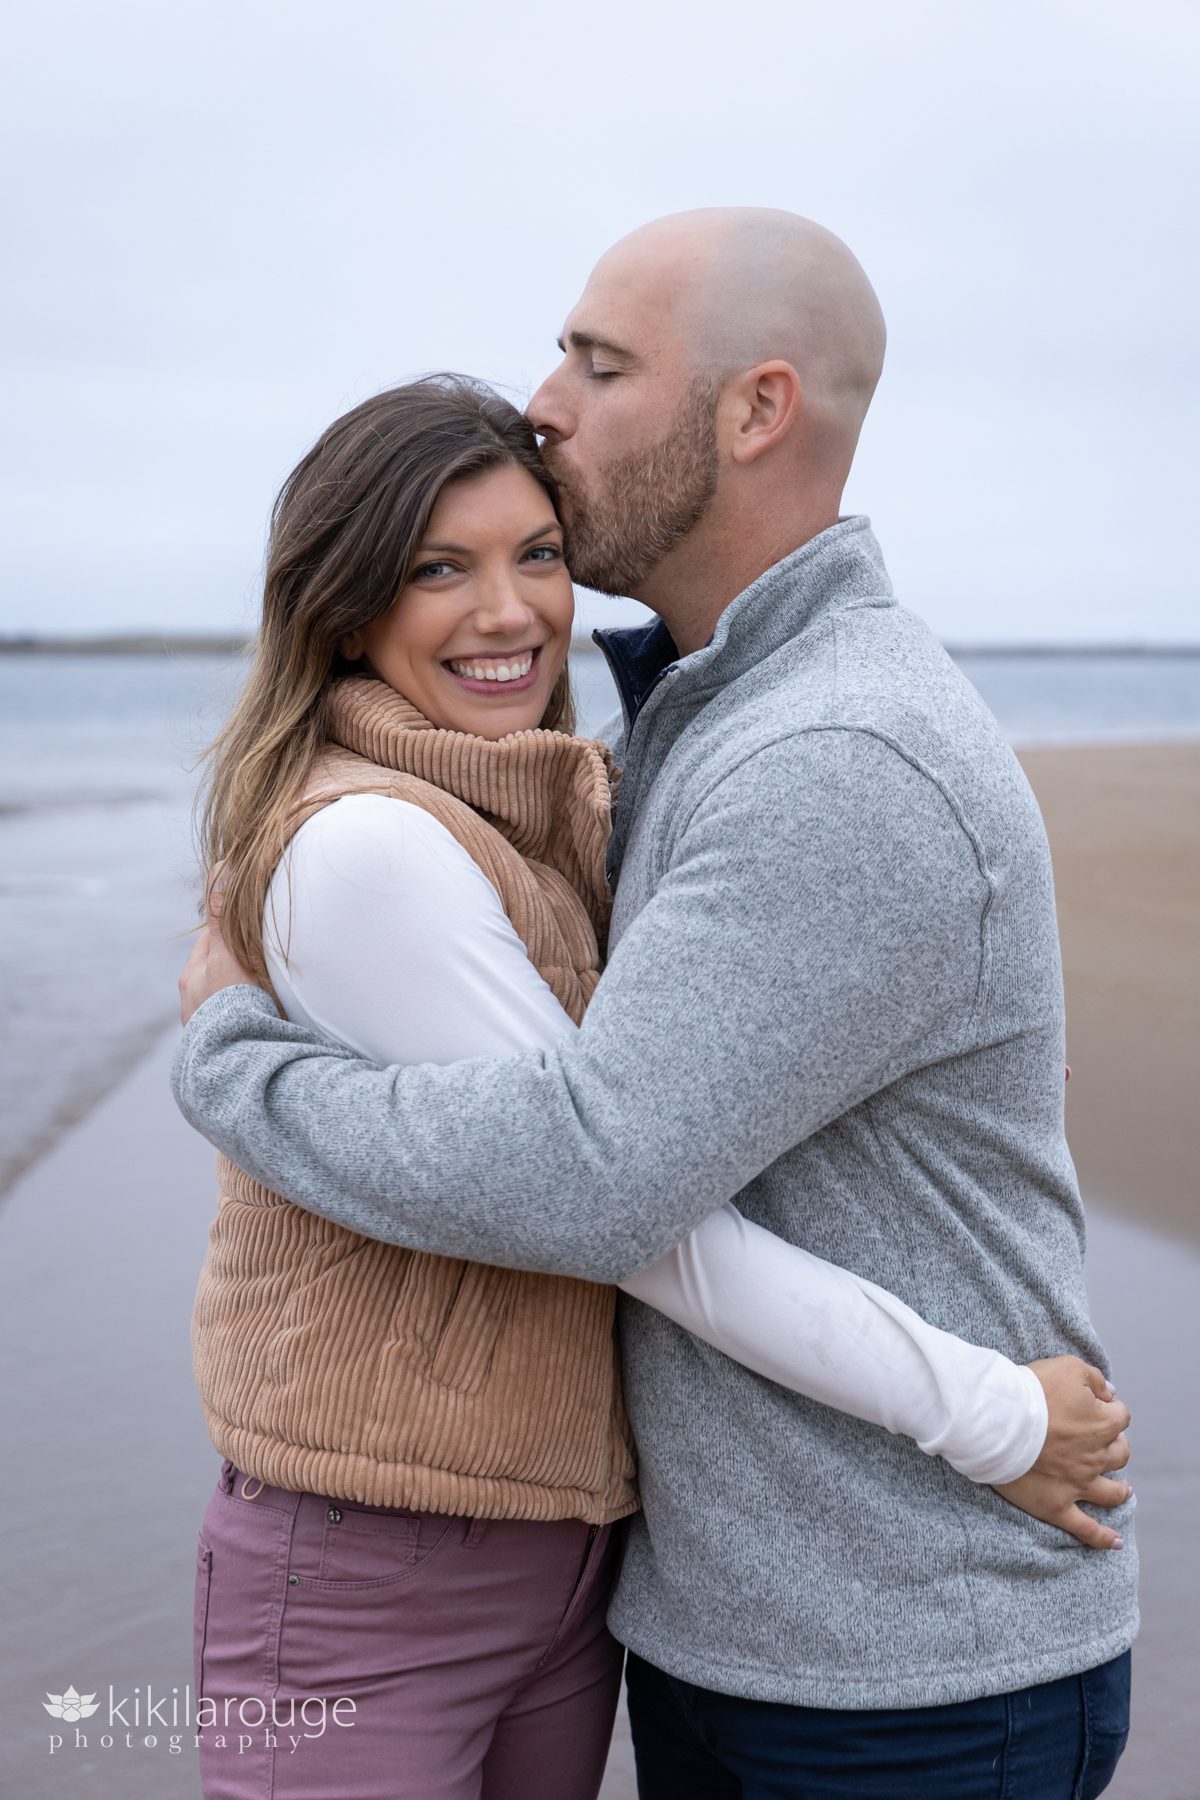 Man in gray sweater hugging and kissing wife on forehead at beach